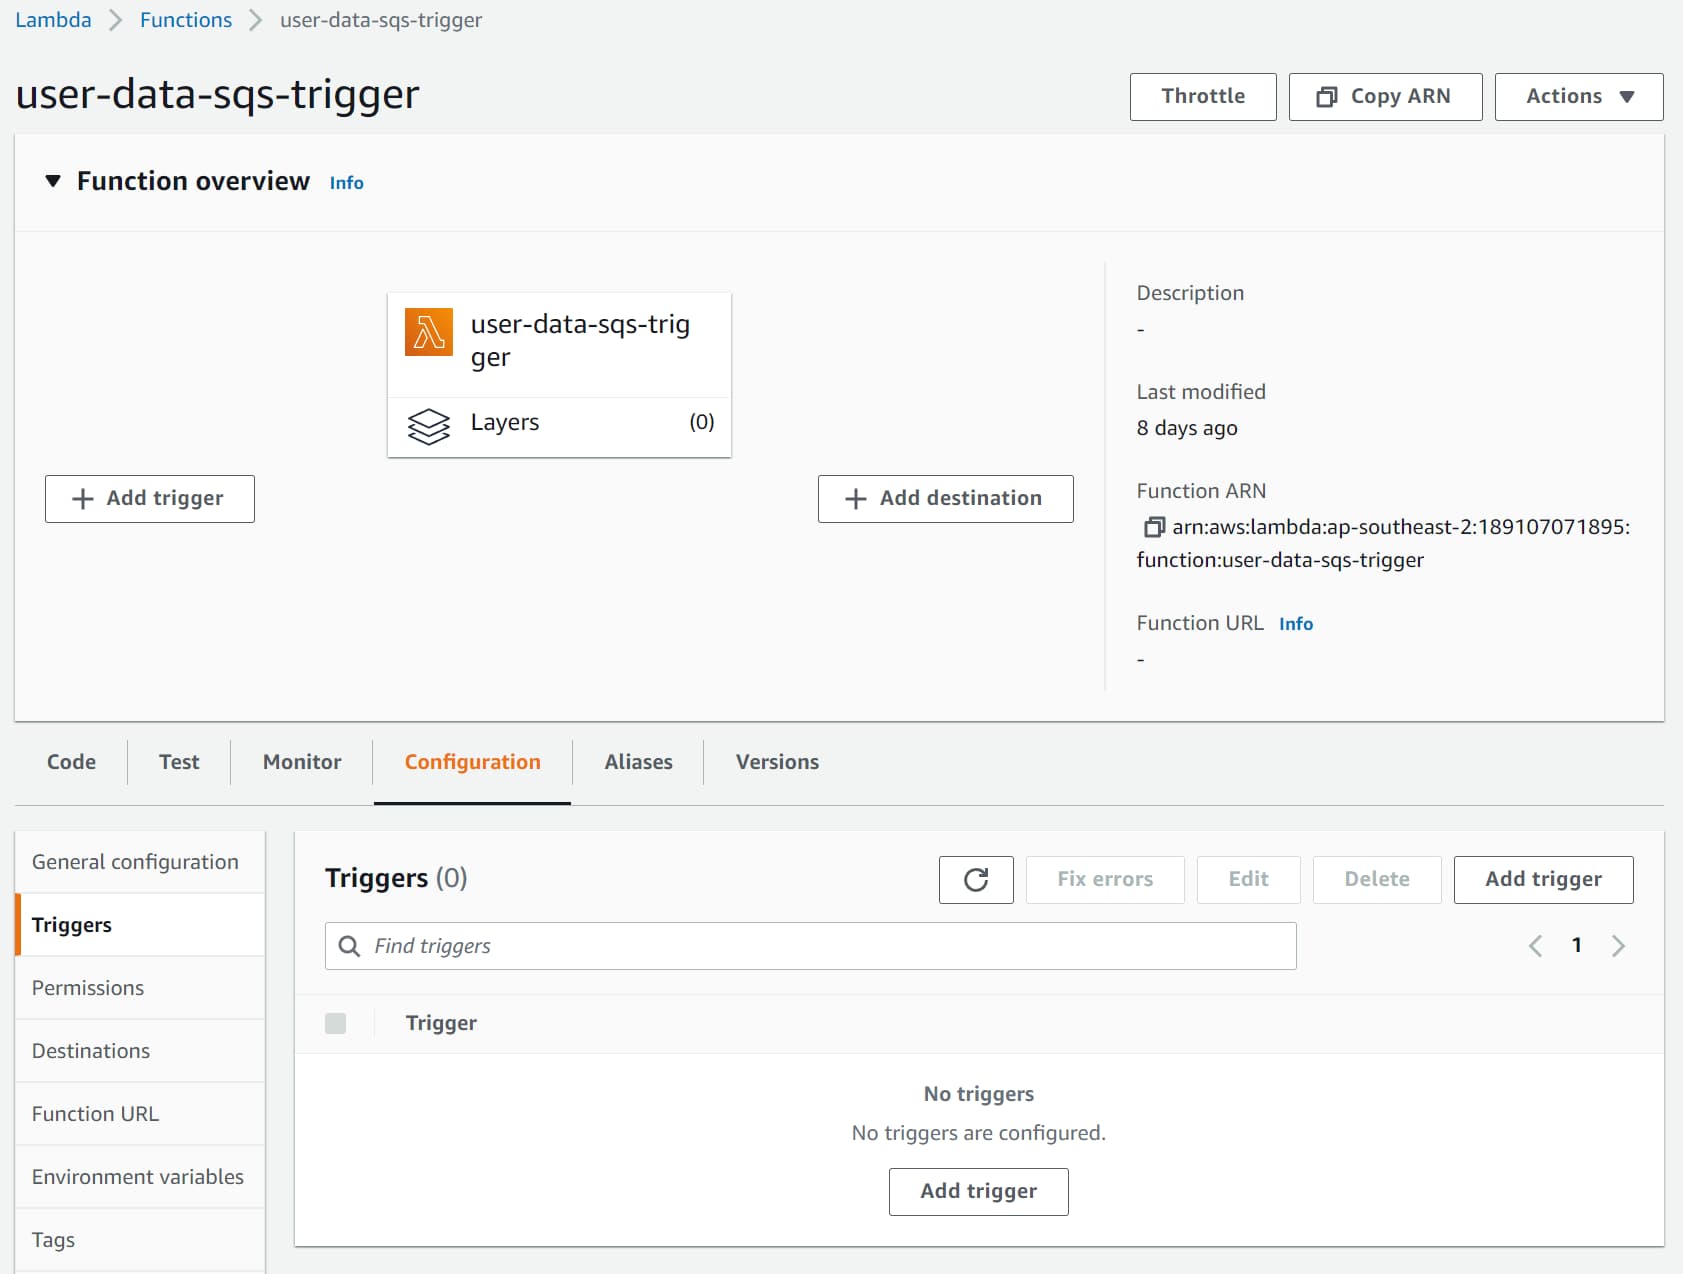 To add a Lambda trigger, select the Add trigger option under Configuration → Triggers.